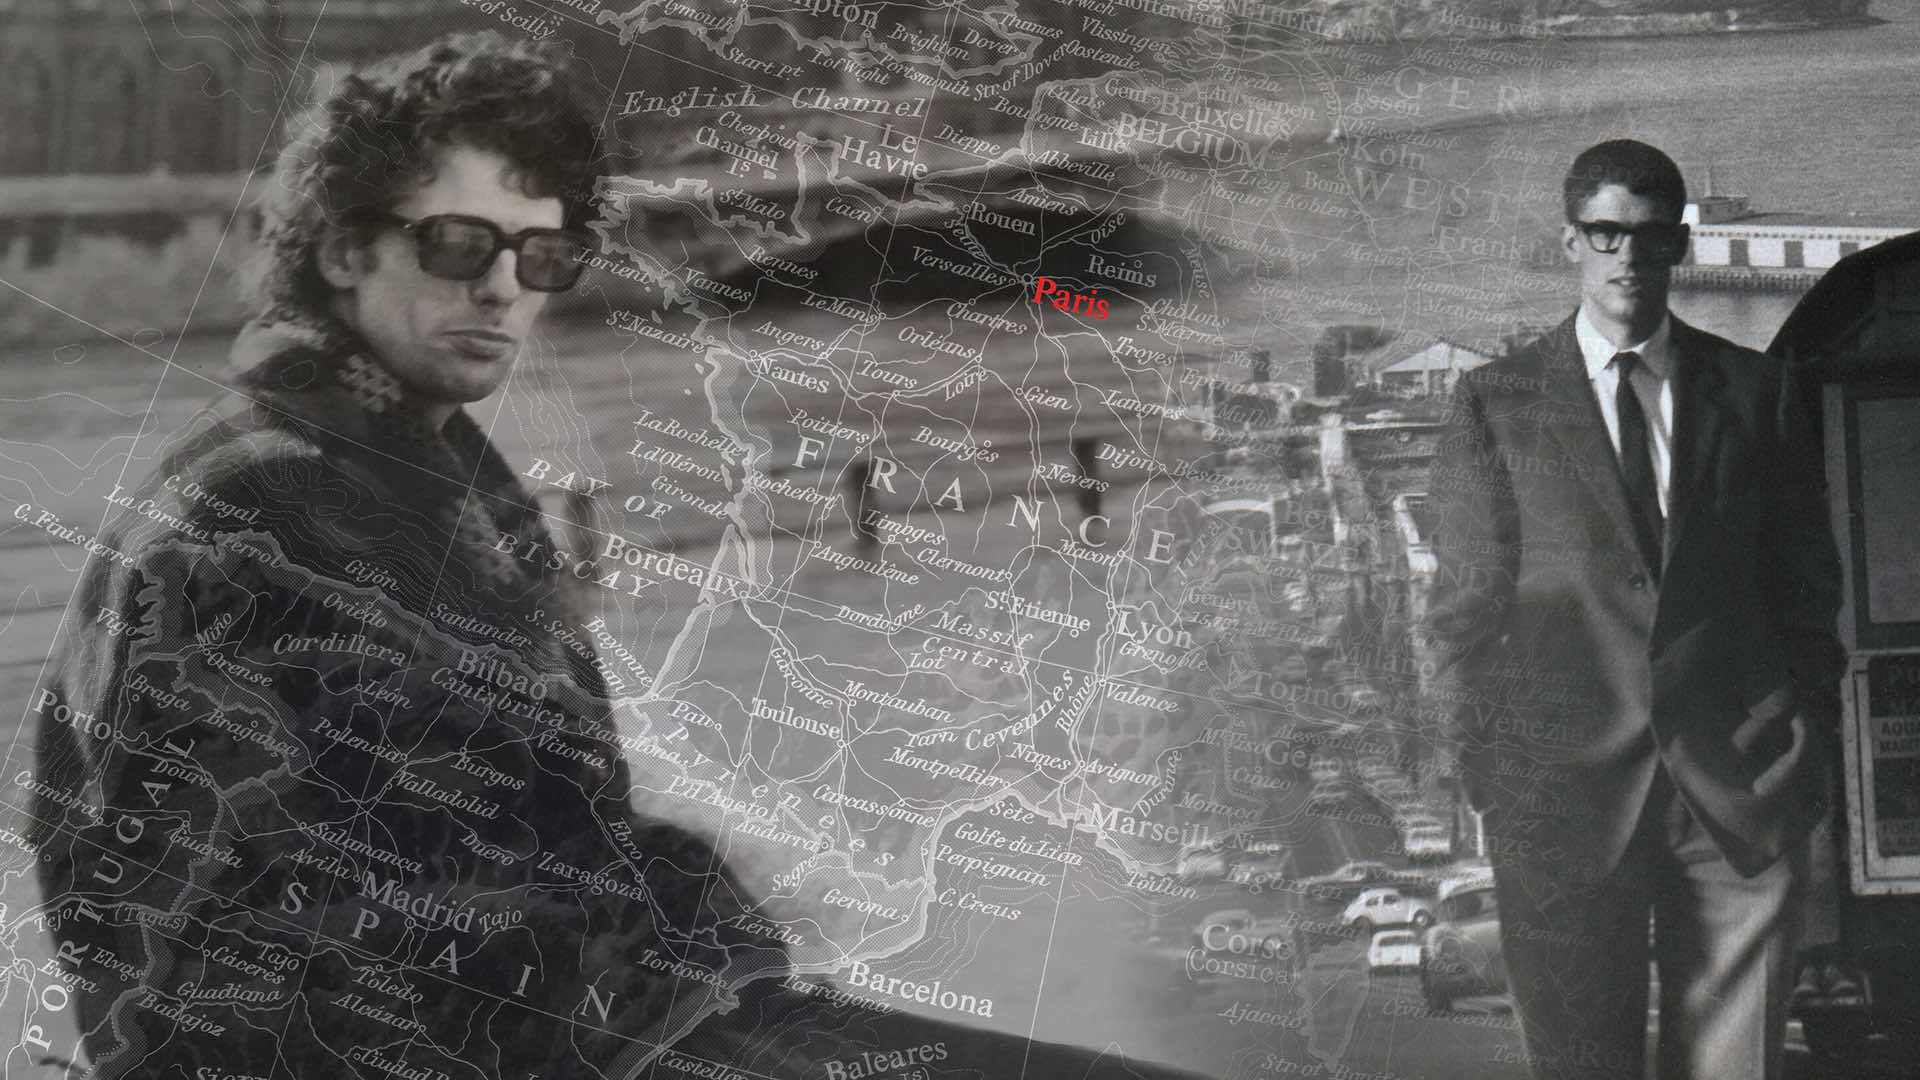 A black & white picture of 2 men superimposed in front of a map of France.